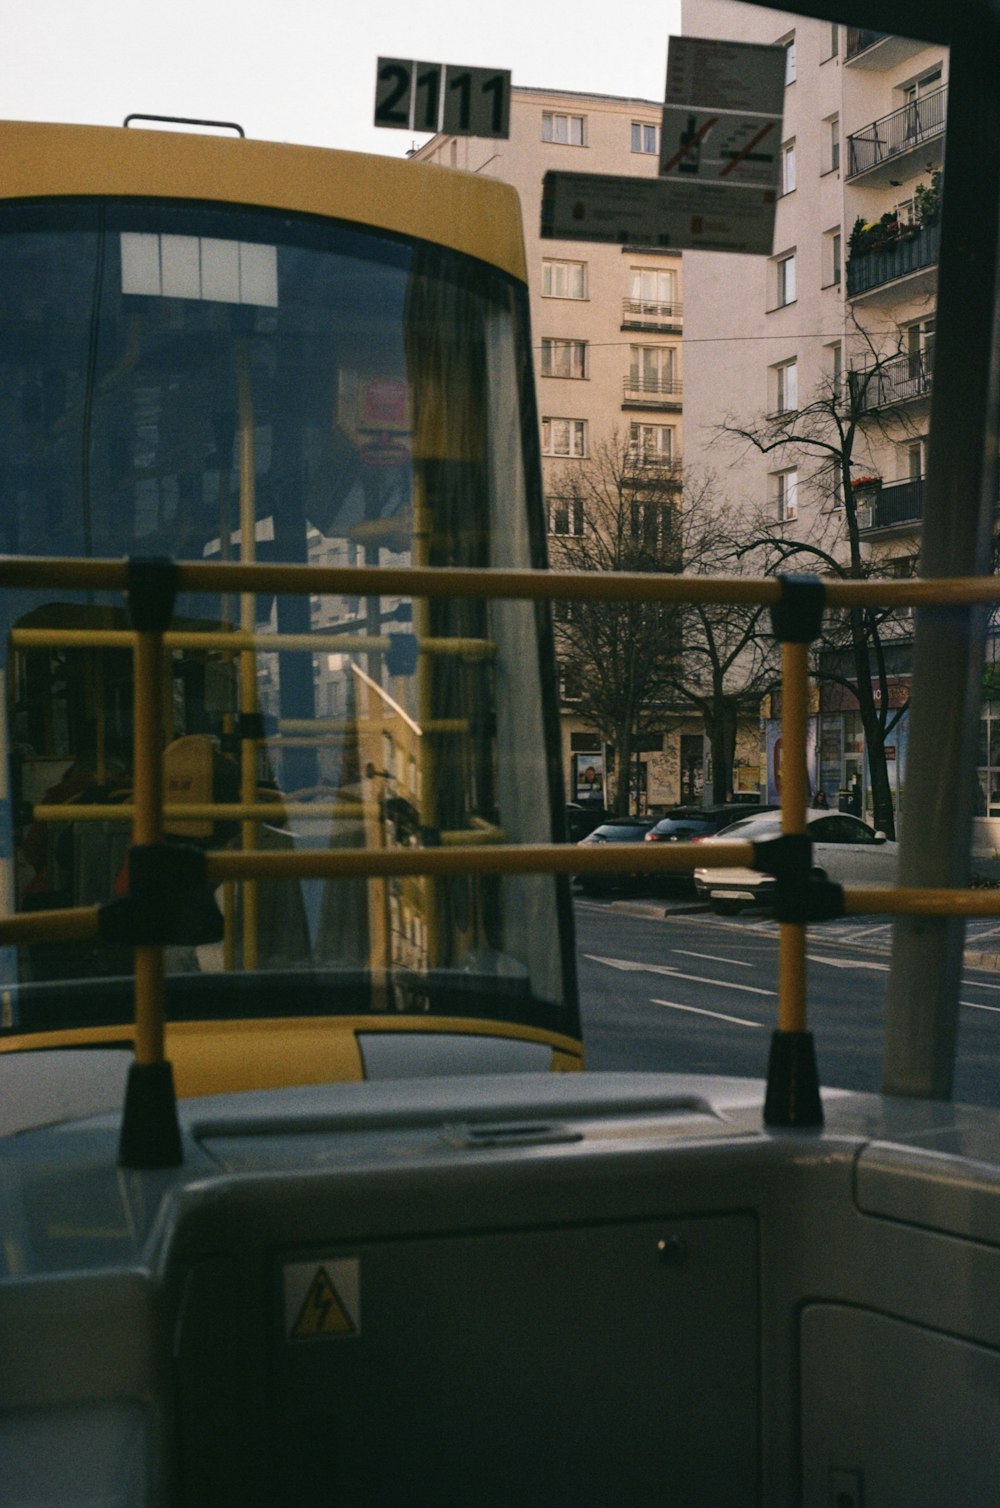 a yellow bus on a street